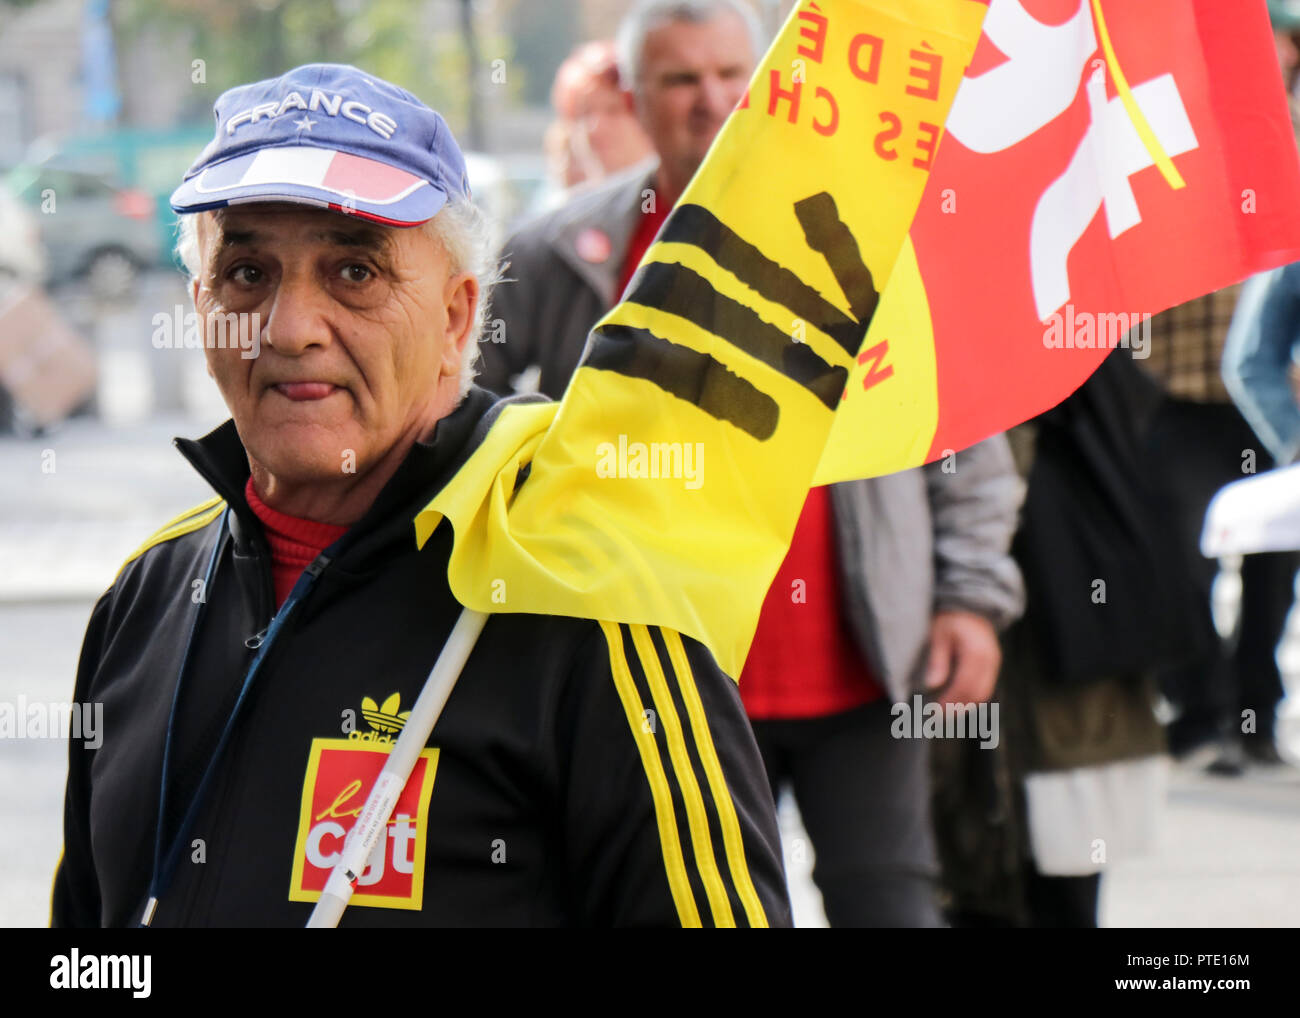 An elderly man seen holding a flag during the protest. People demonstrate during a one-day nationwide strike over French President Emmanuel Macron's policies in Strasbourg, eastern France. Stock Photo